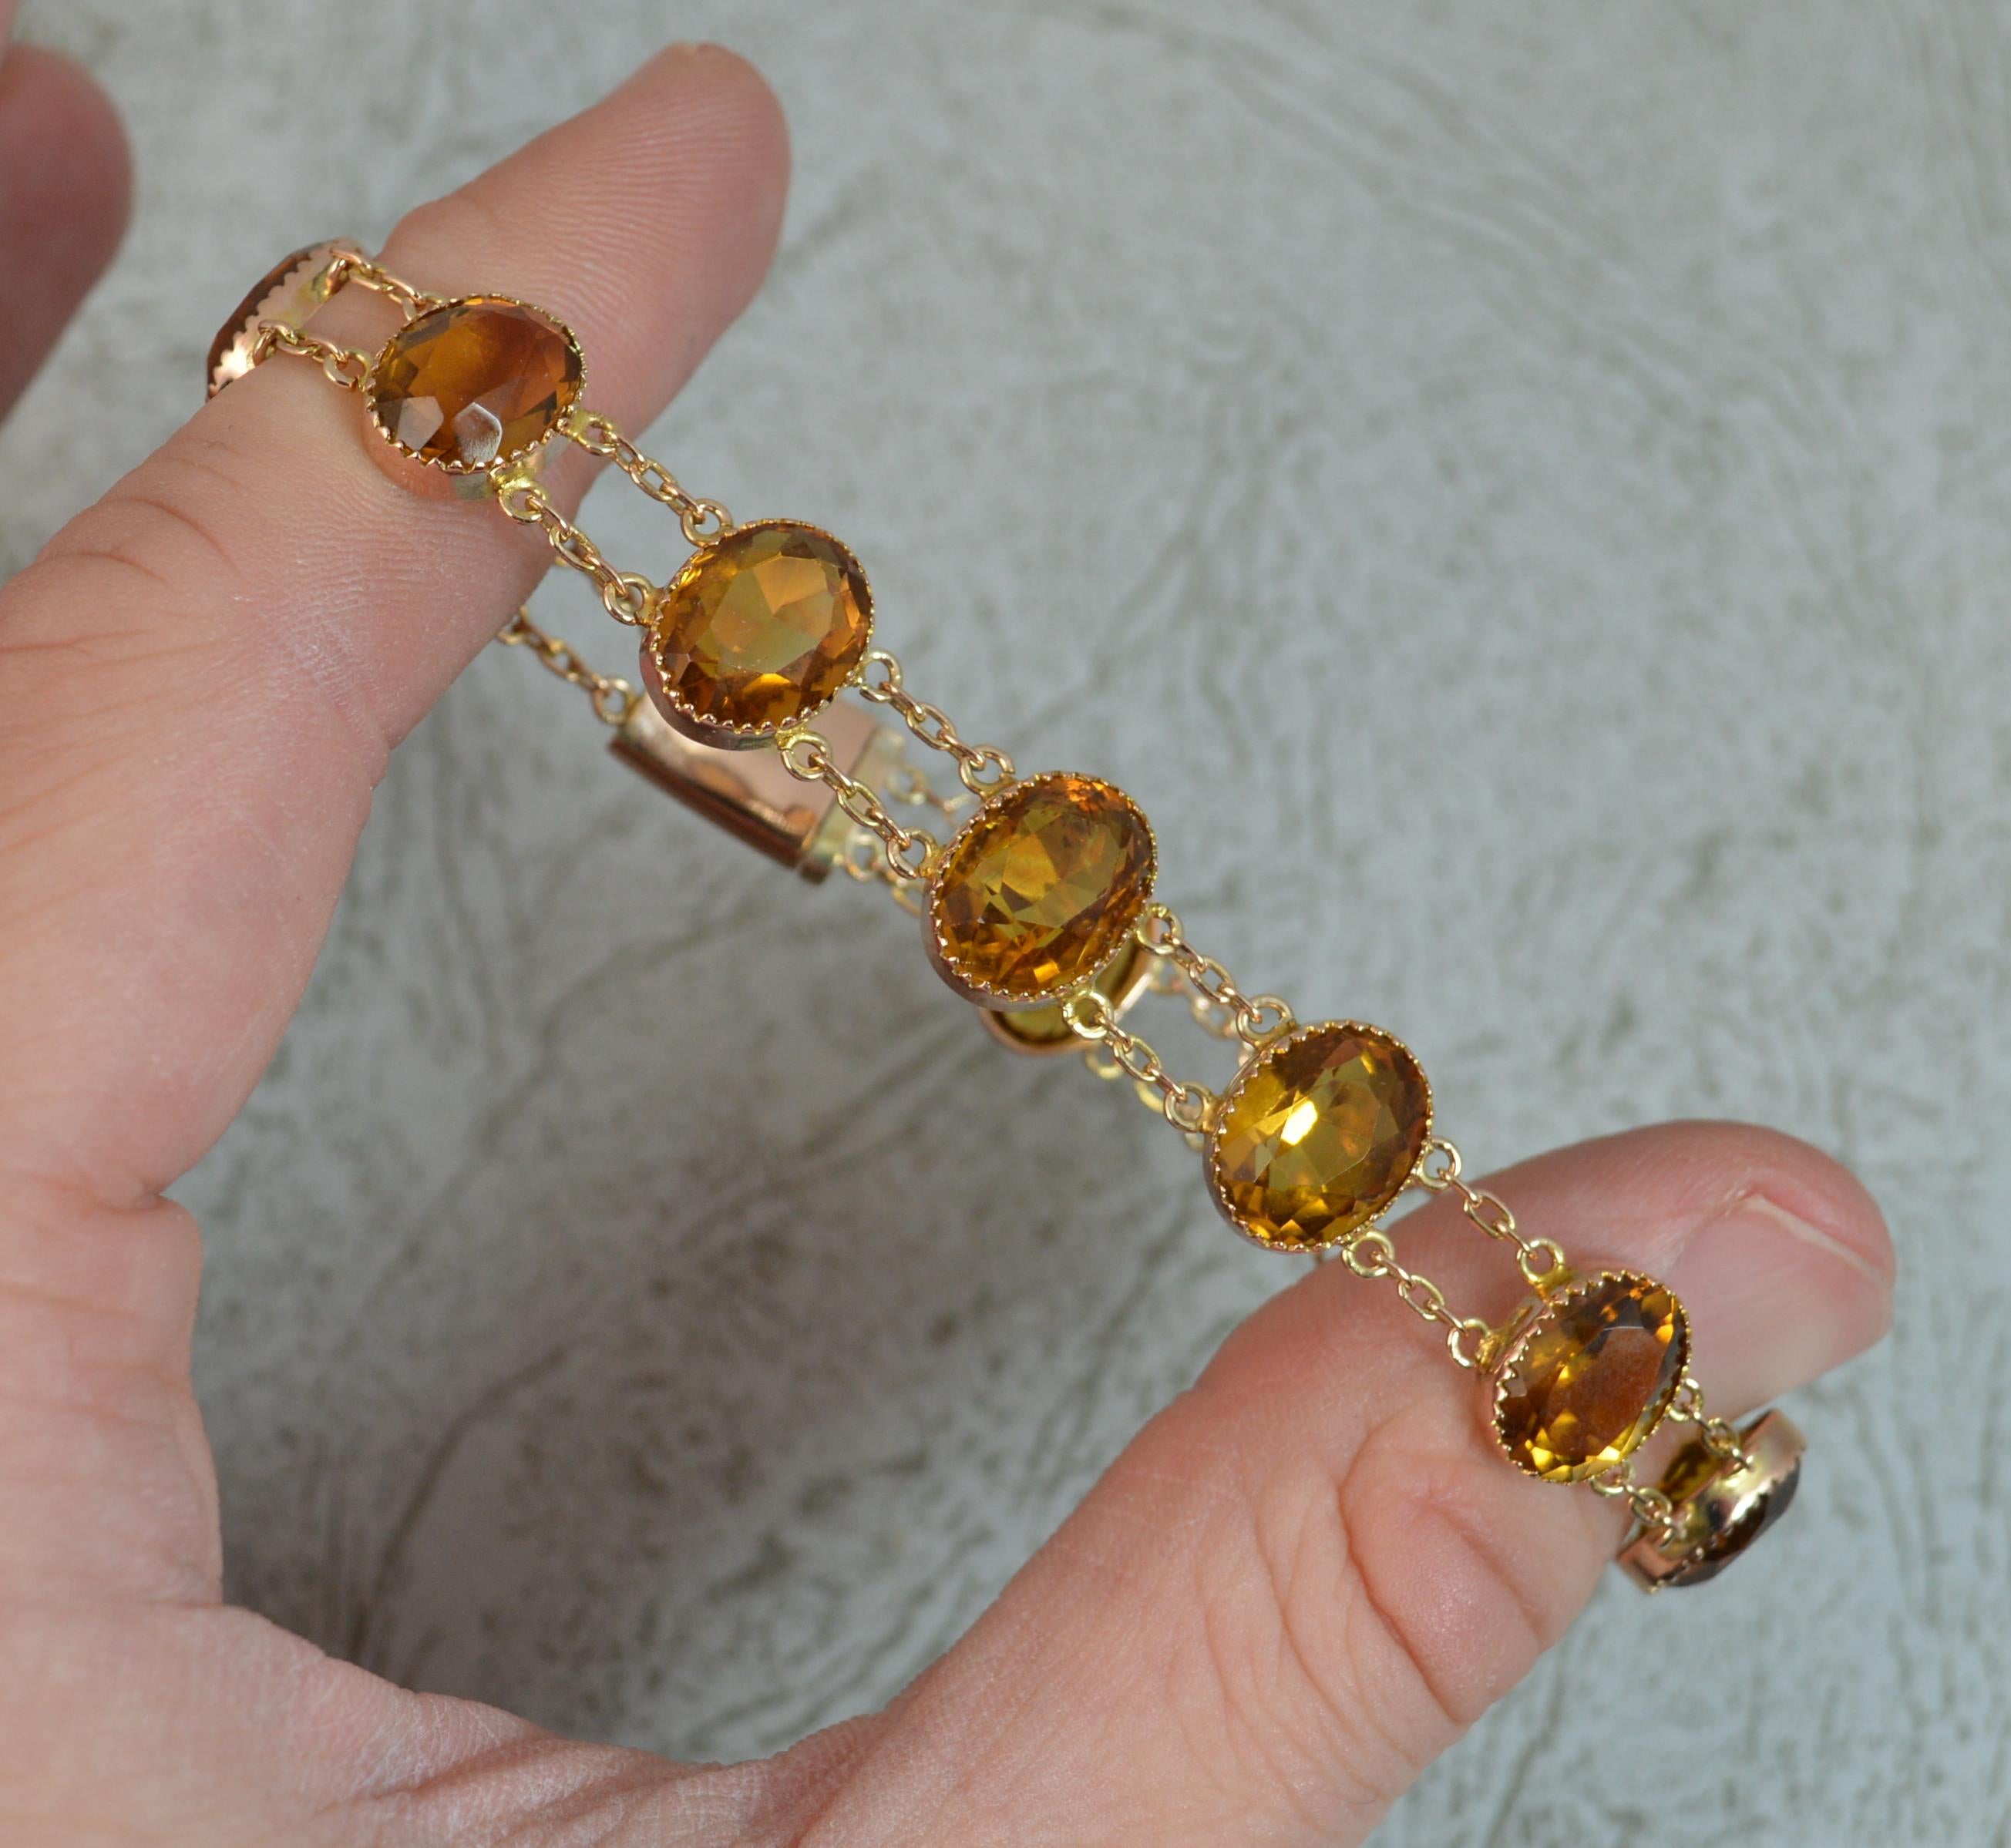 A superb mid Victorian period example. c1890.
Designed with eleven natural oval cut orange citrine stones with fine grain settings. Each held by two rows of gold link chains.
Solid 9 carat rose gold example.

CONDITION ; Very good. Well set stones.